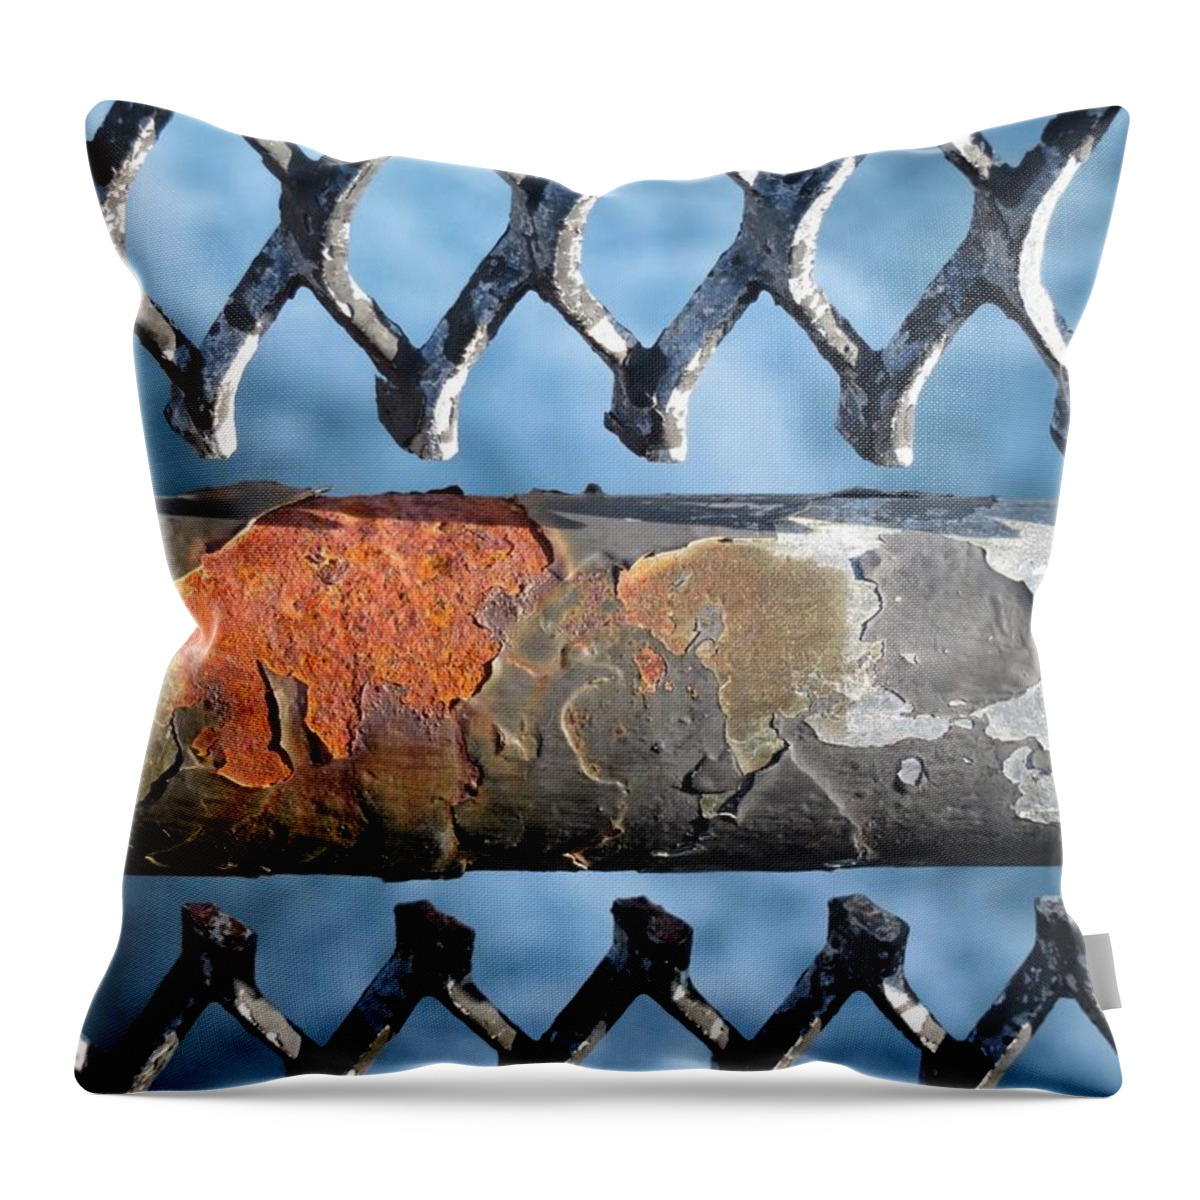 Blue Throw Pillow featuring the photograph Behind the Bar by Diana Rajala